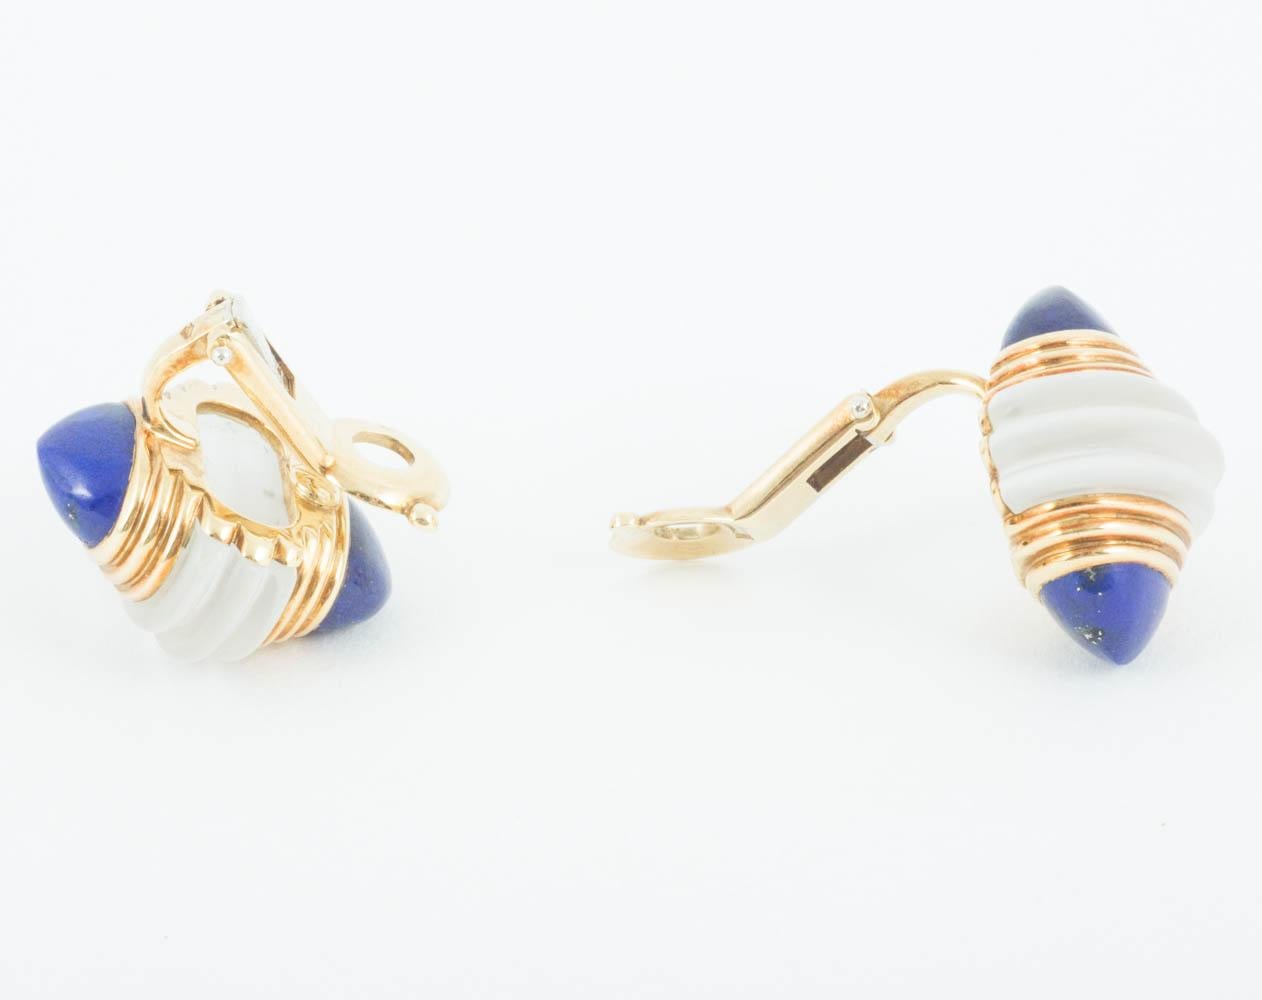 Boucheron Clip Earrings, Frosted Crystal & Lapis Lazuli in 18k Gold, French 1950 im Zustand „Gut“ im Angebot in London, GB